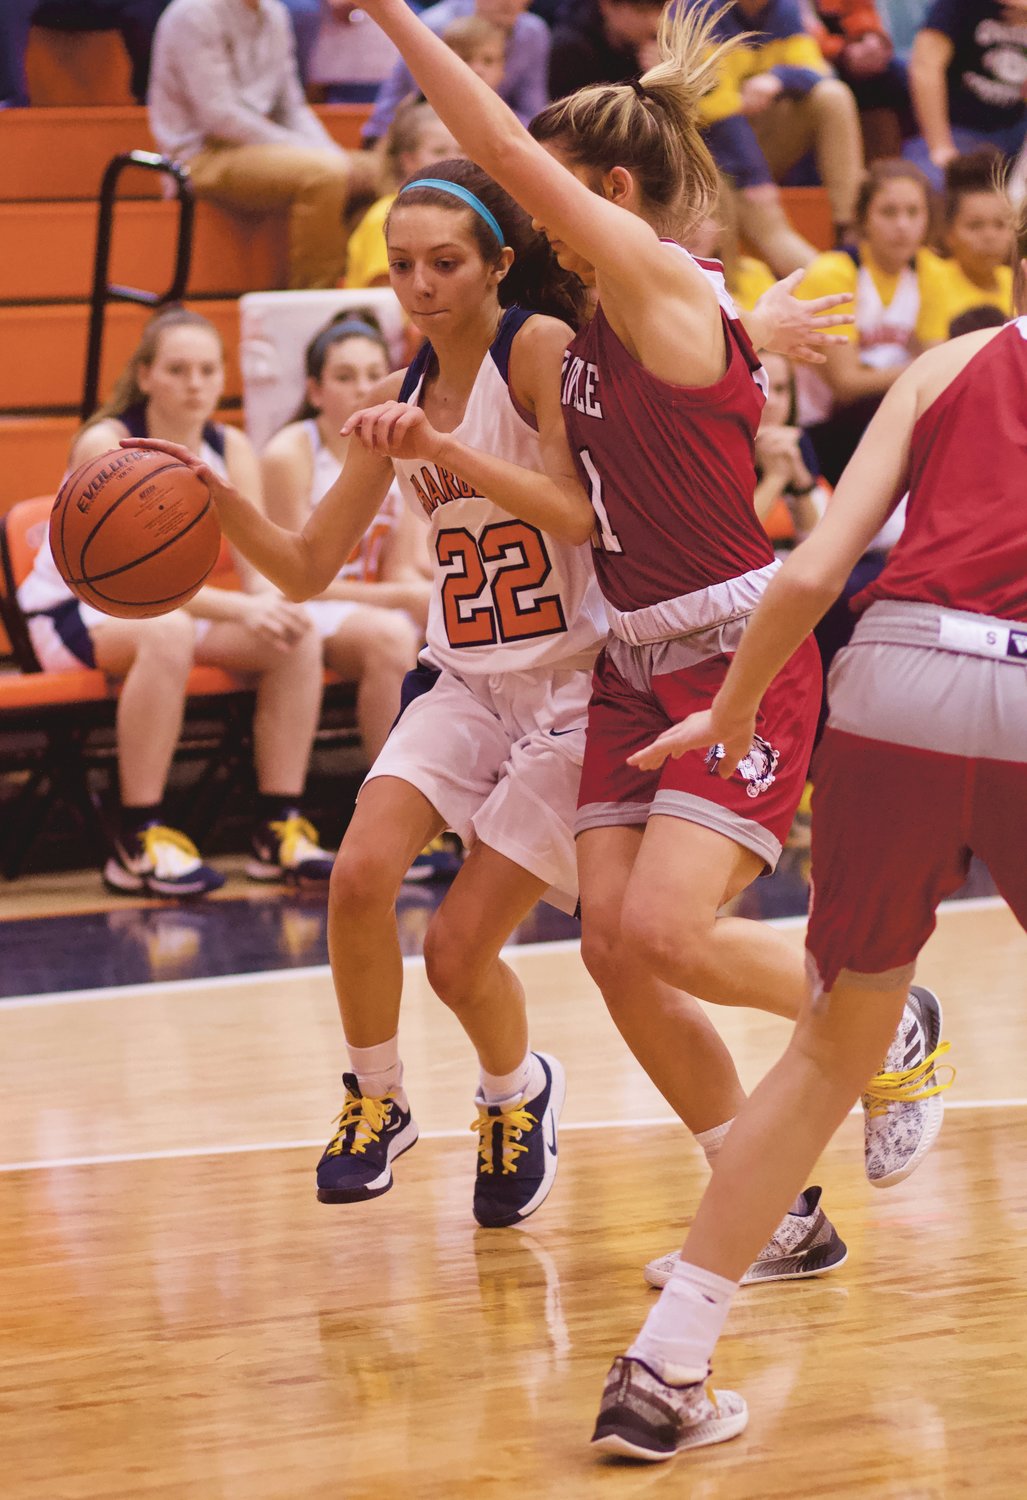 Maddie Moseley led the Chargers with six points in a 72-24 Sagamore Conference loss to Danville.